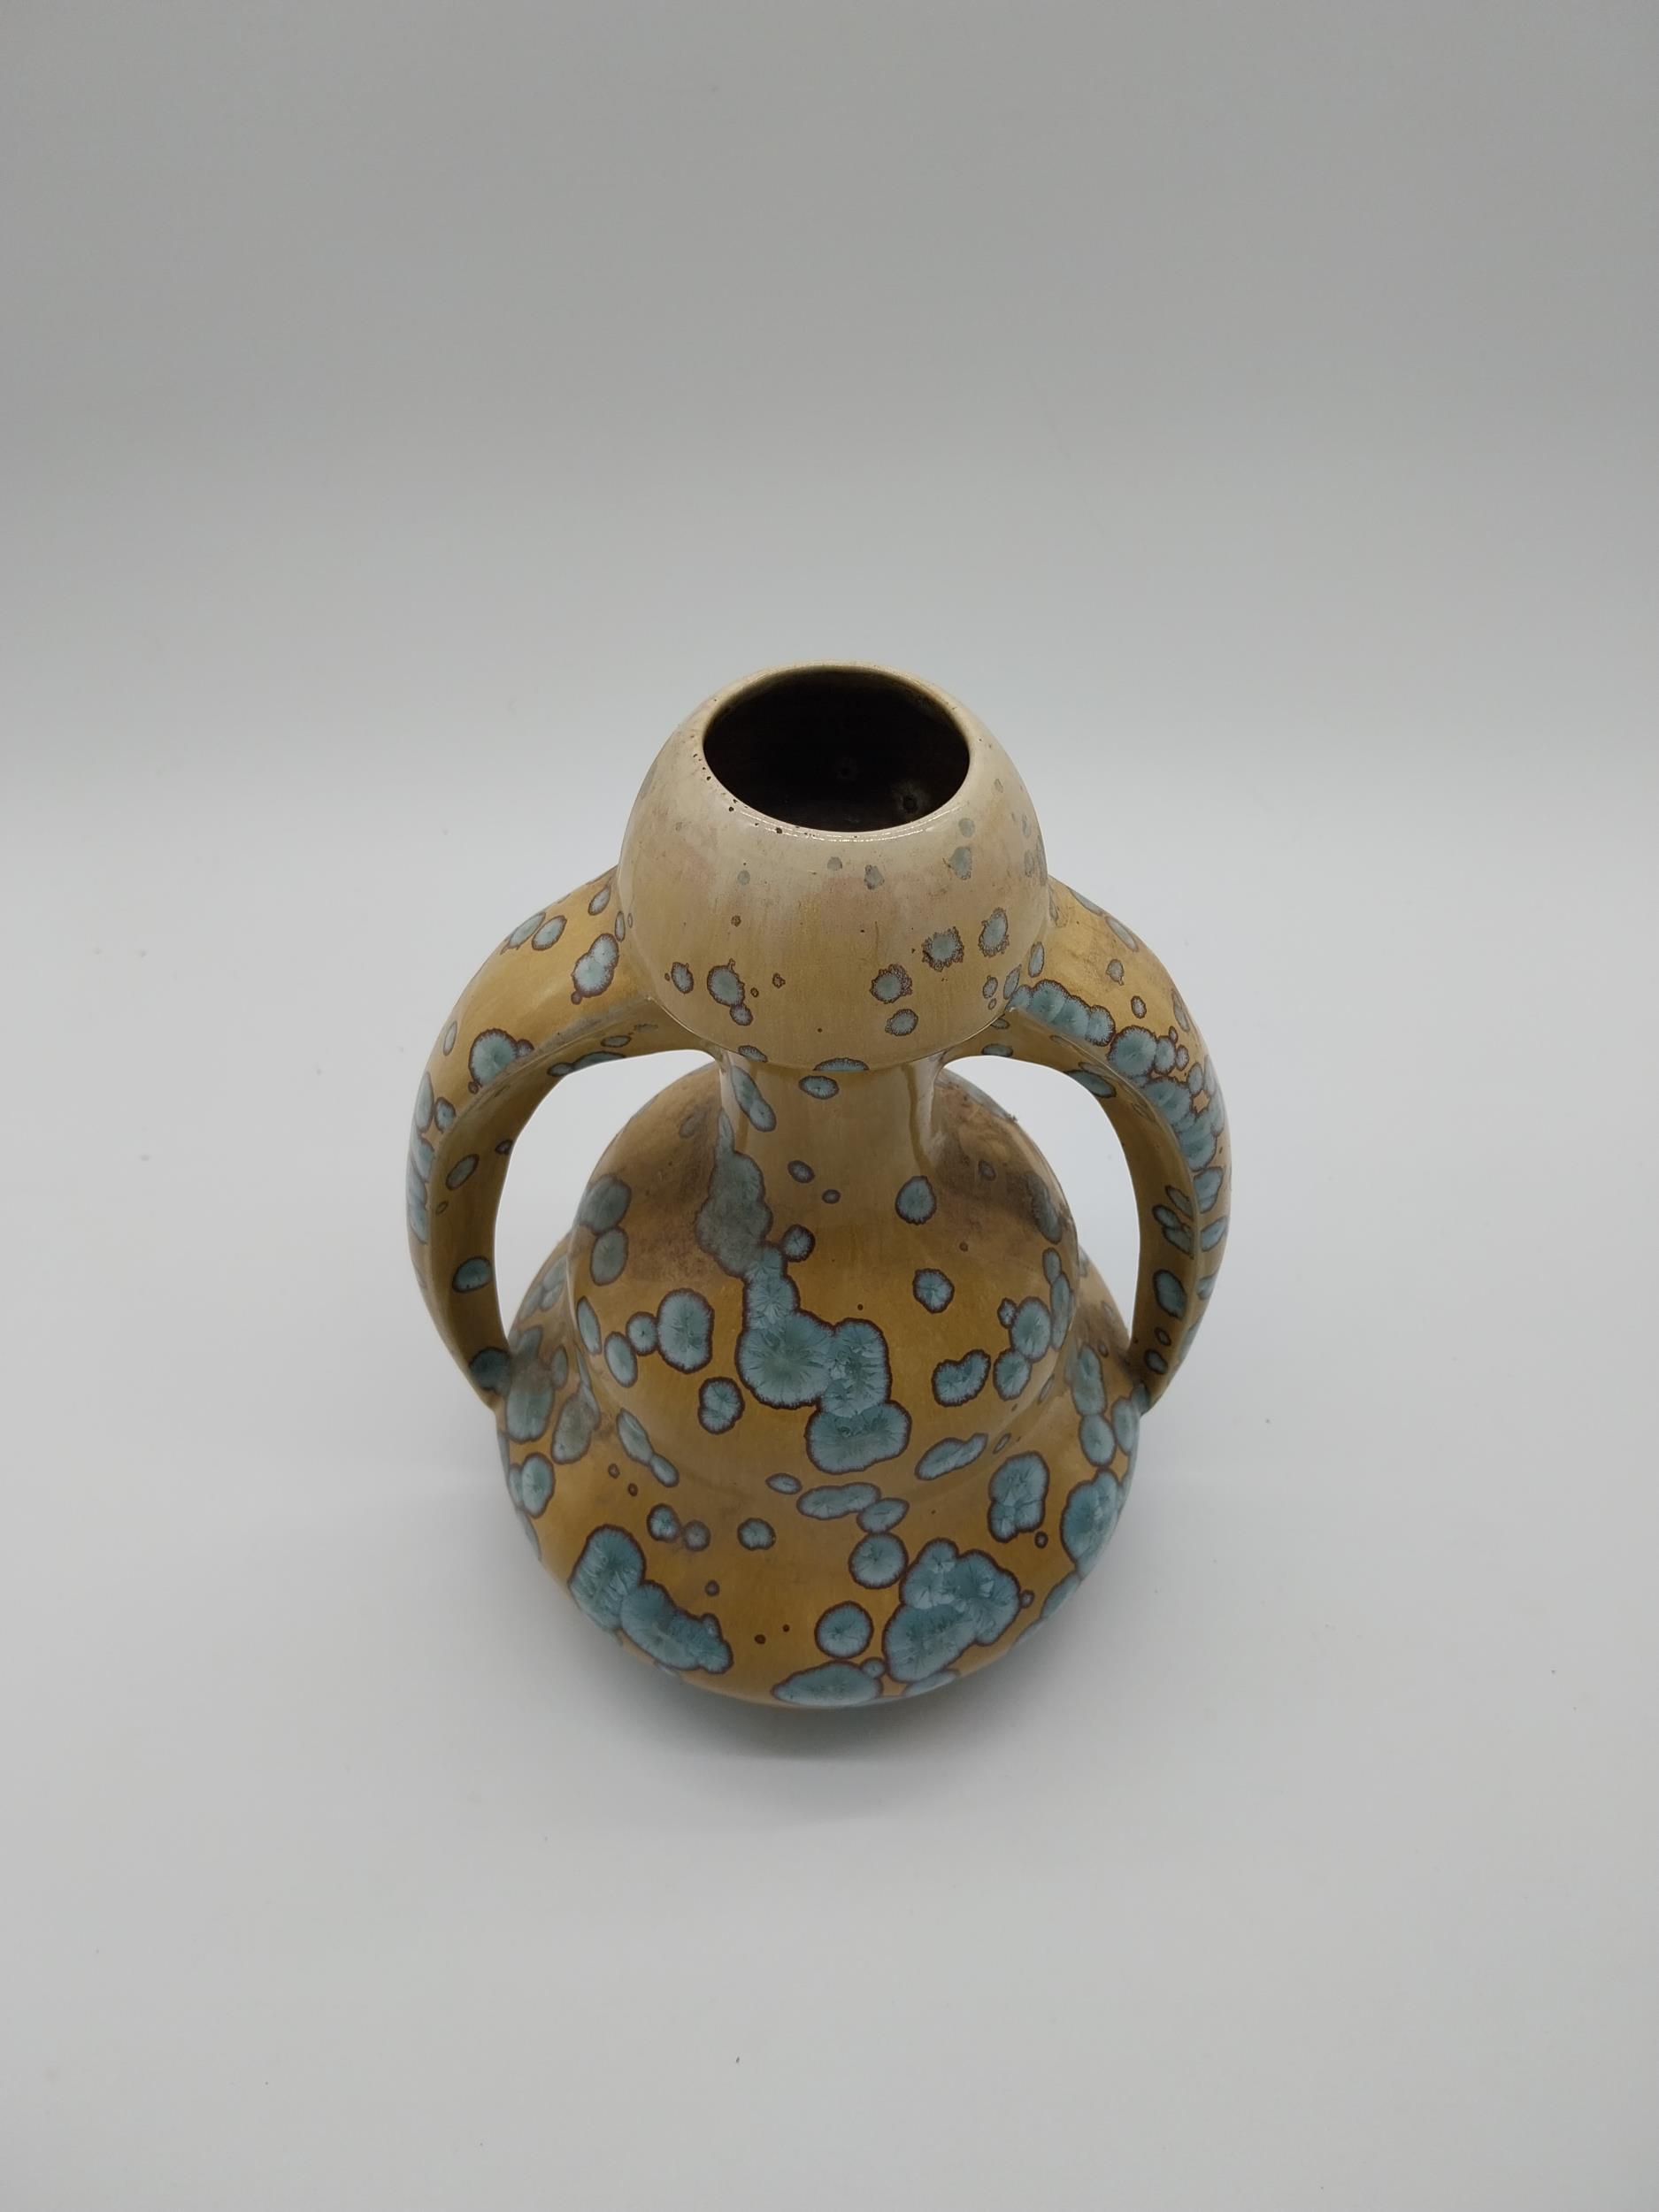 Early 20th C. French ceramic vase with two handles. {26 cm H x 20 cm W x 16 cm D}. - Image 2 of 6